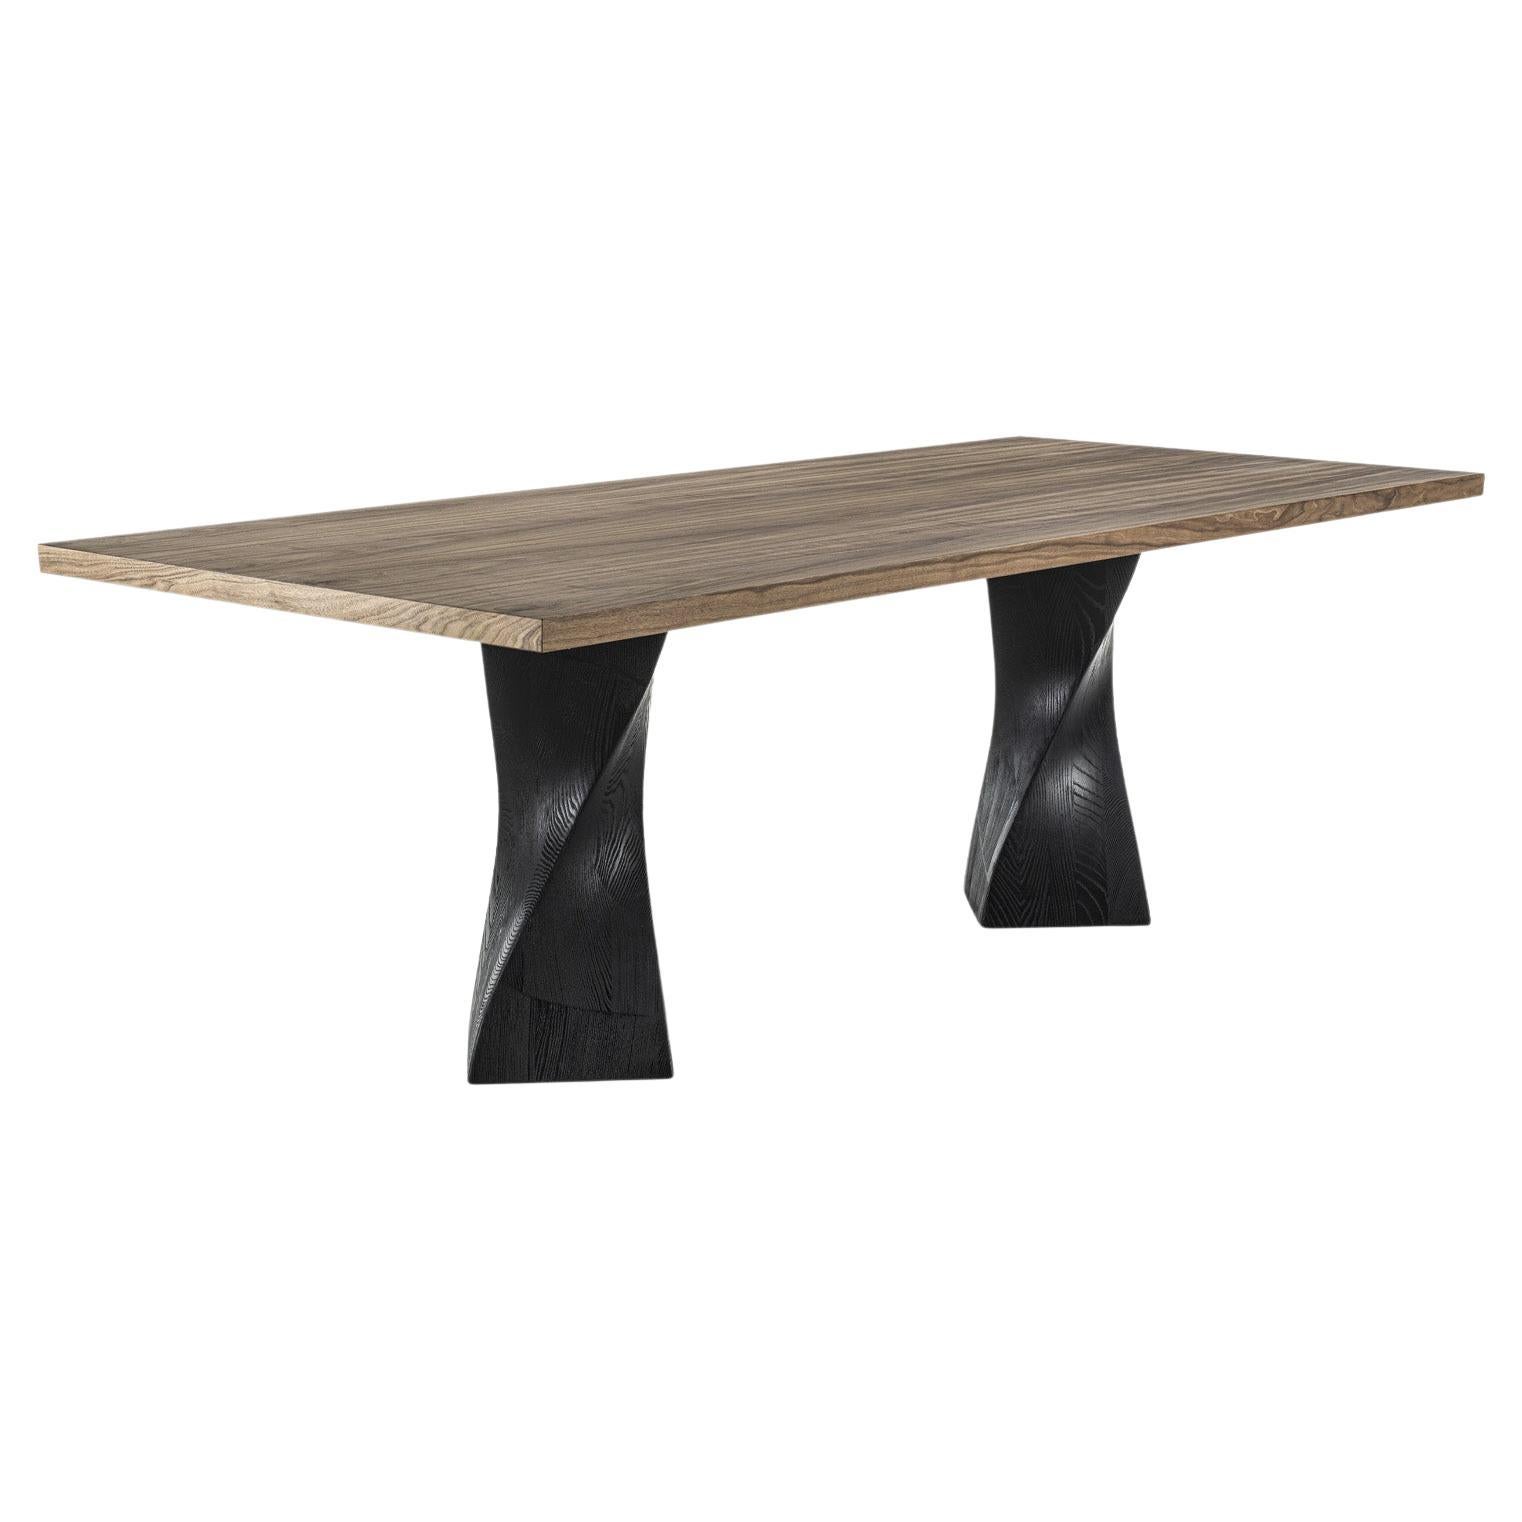 Simple Twist Wood Table, Designed by Studio Excalibur, Made in Italy